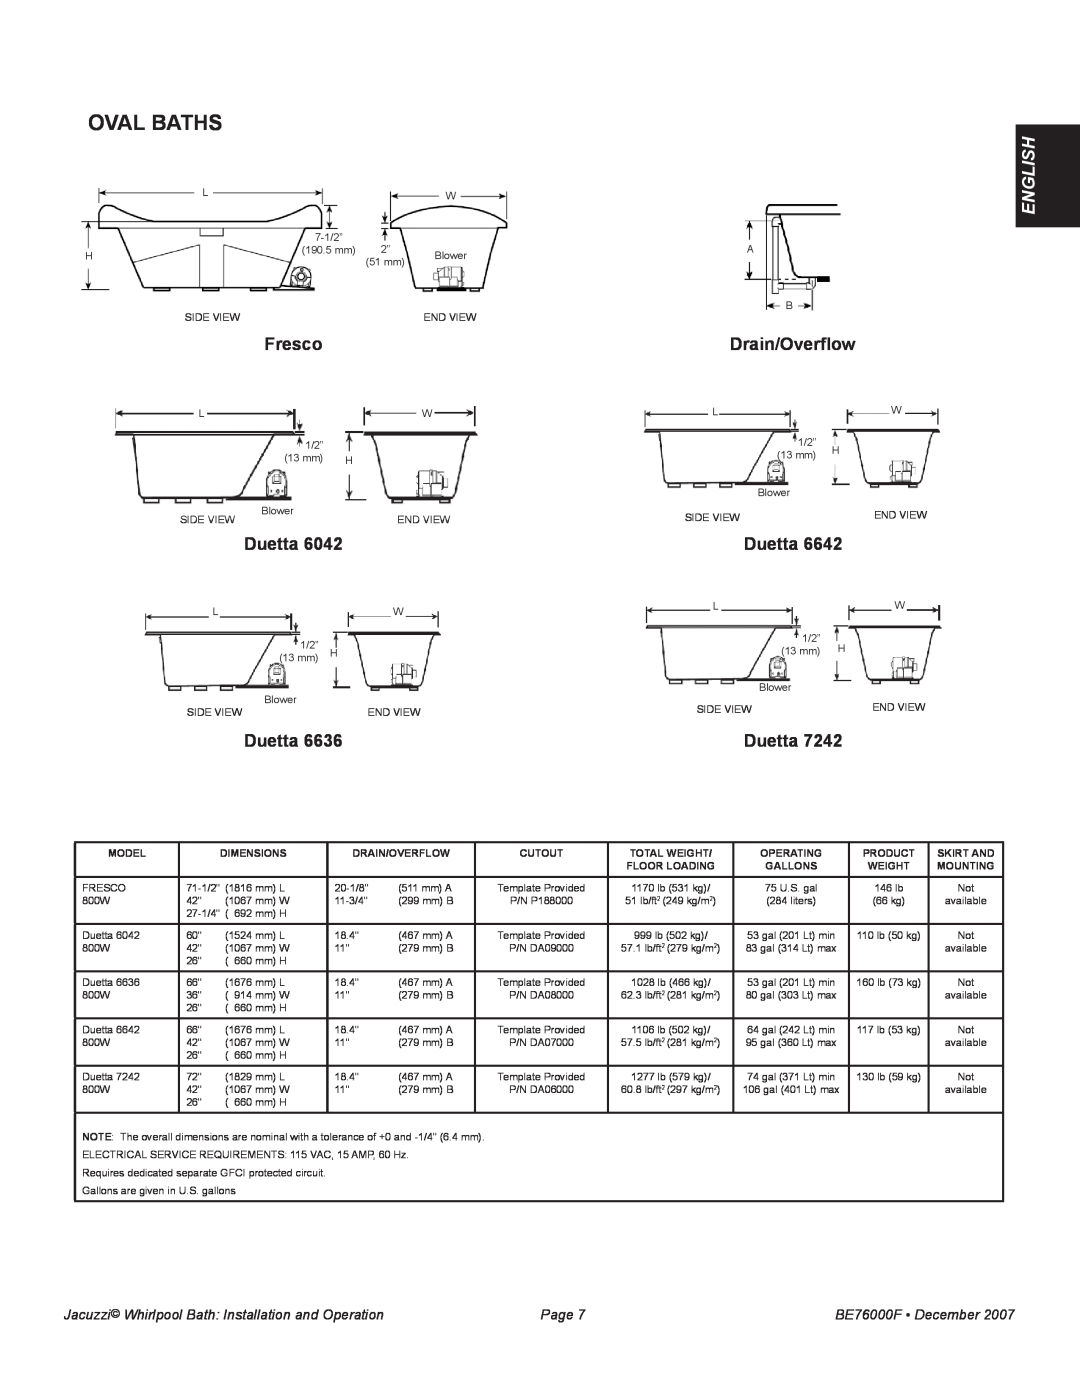 Jacuzzi LUXURY SERIES manual OVAL Baths, Fresco, Duetta, English, Drain/Overflow, Page, BE76000F December 